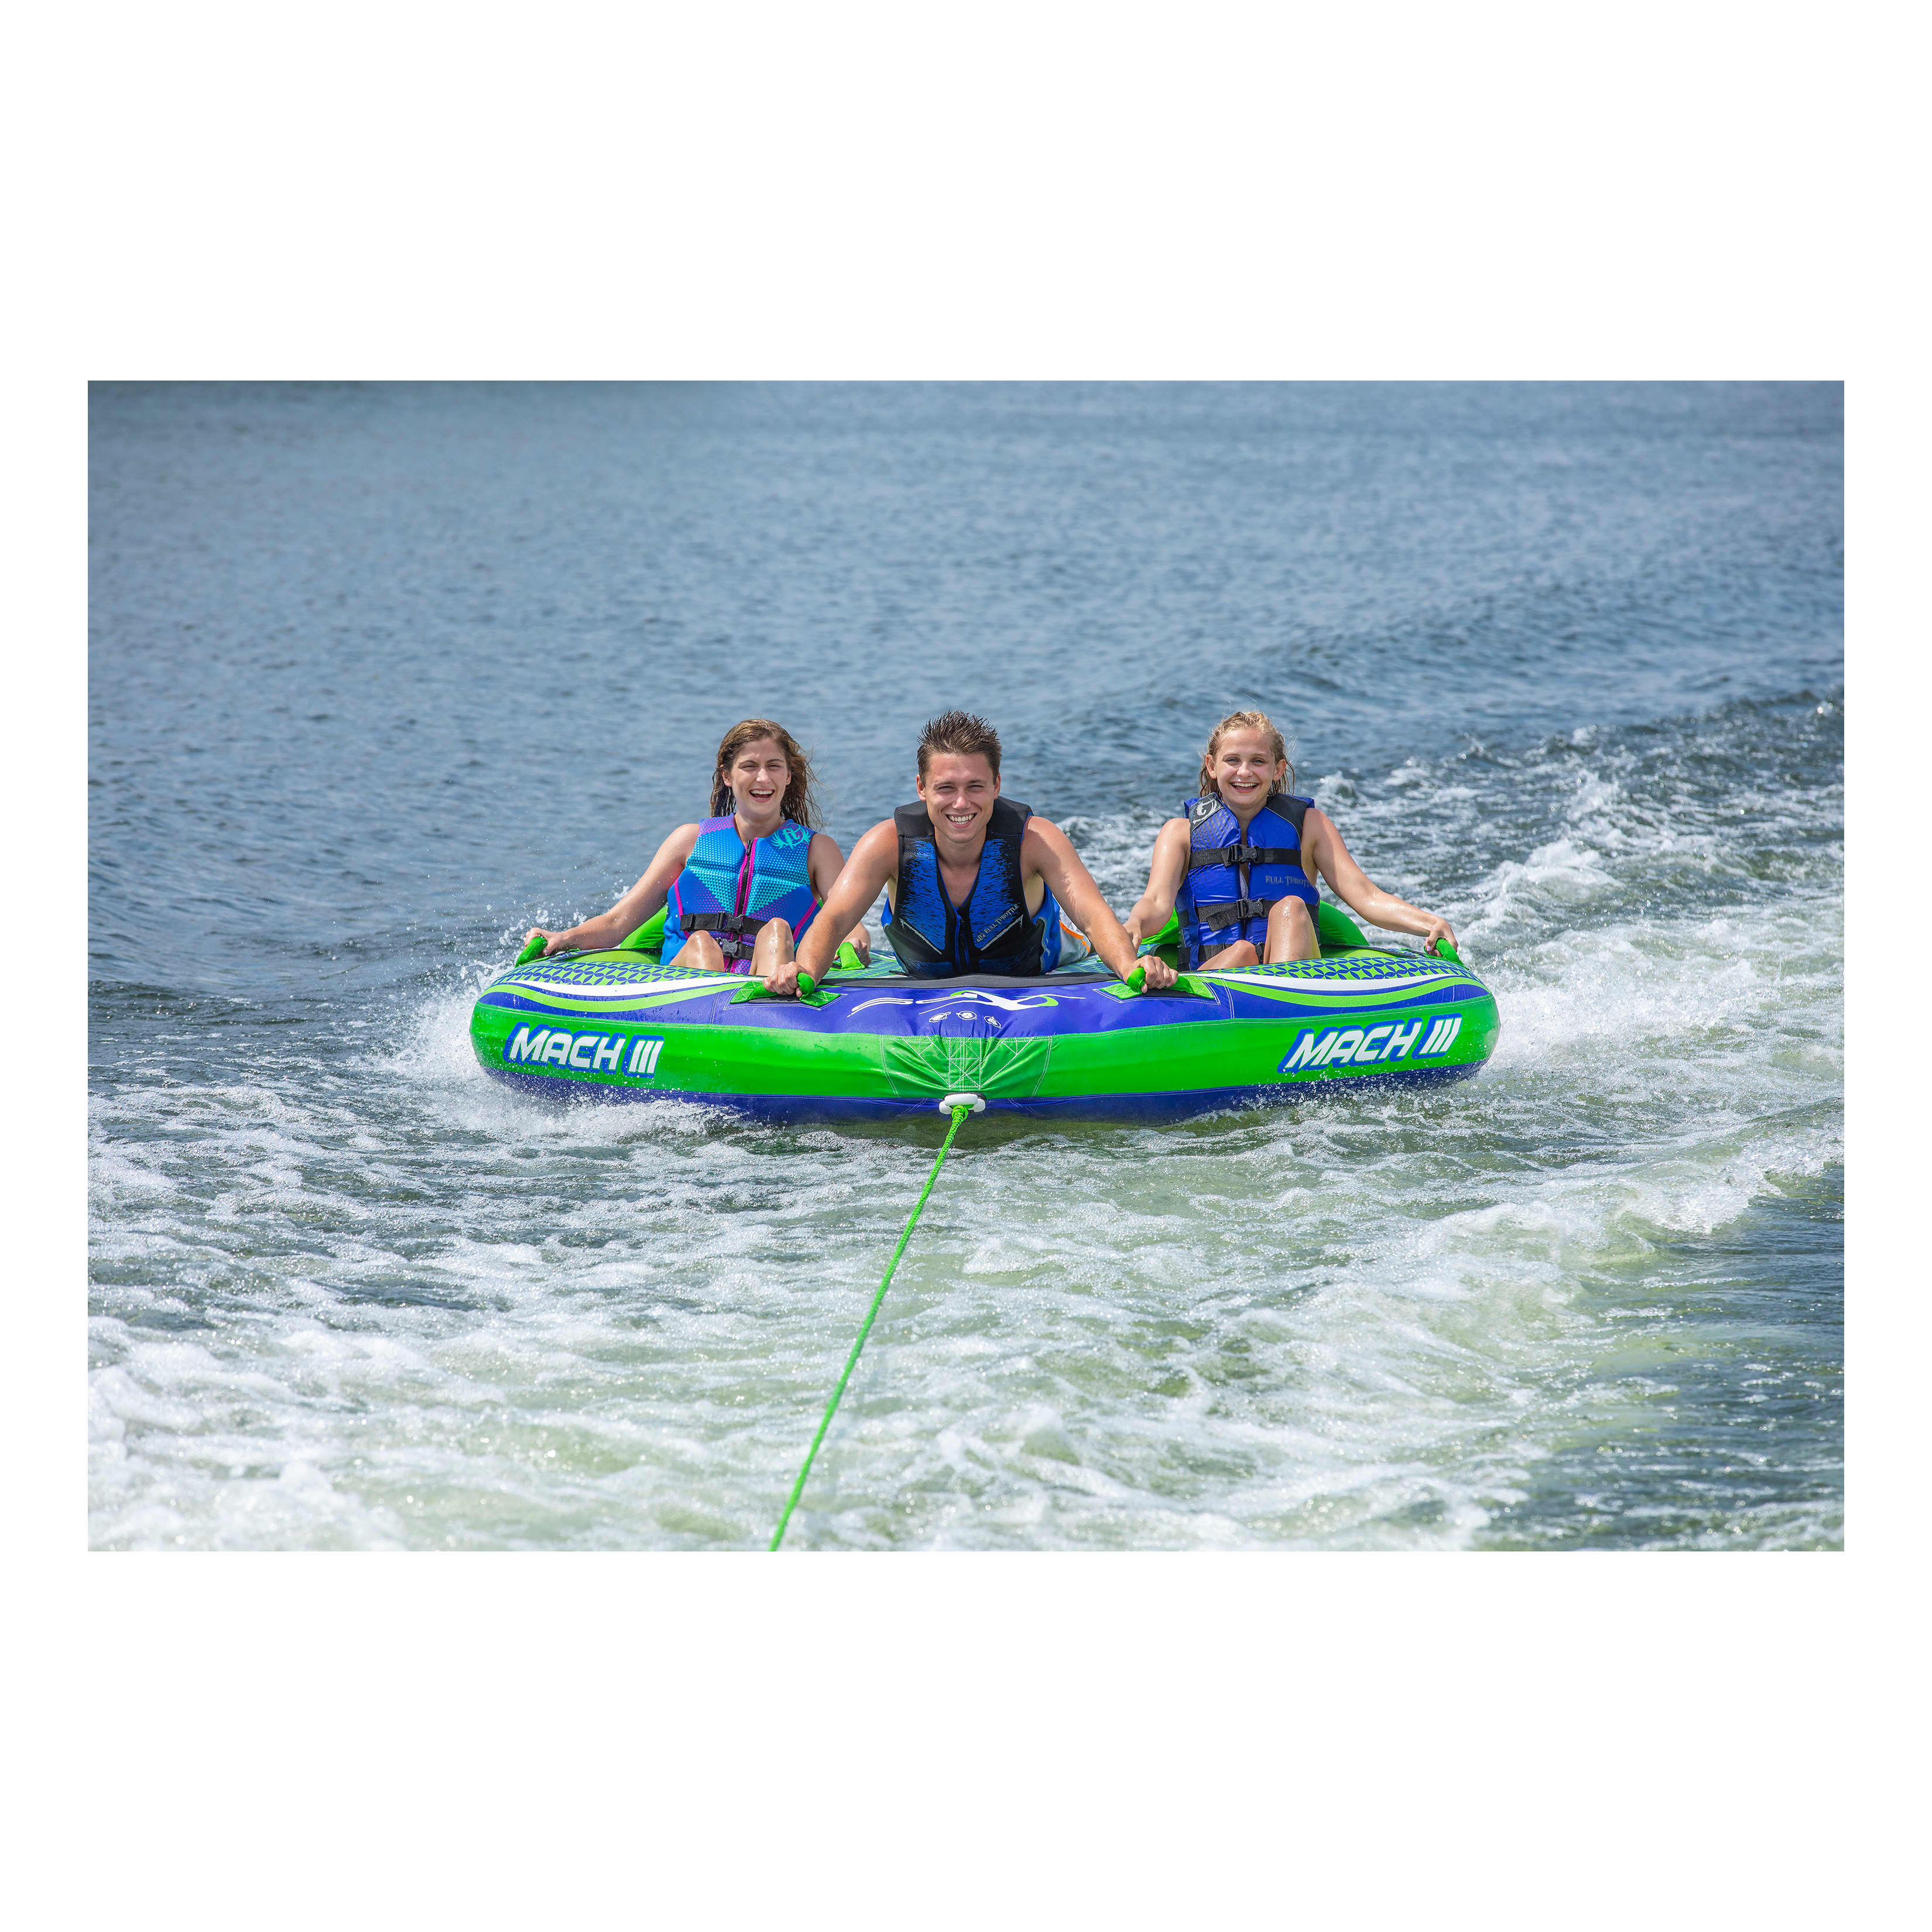 XPS Mach III Three-Rider Towable Tube - in use